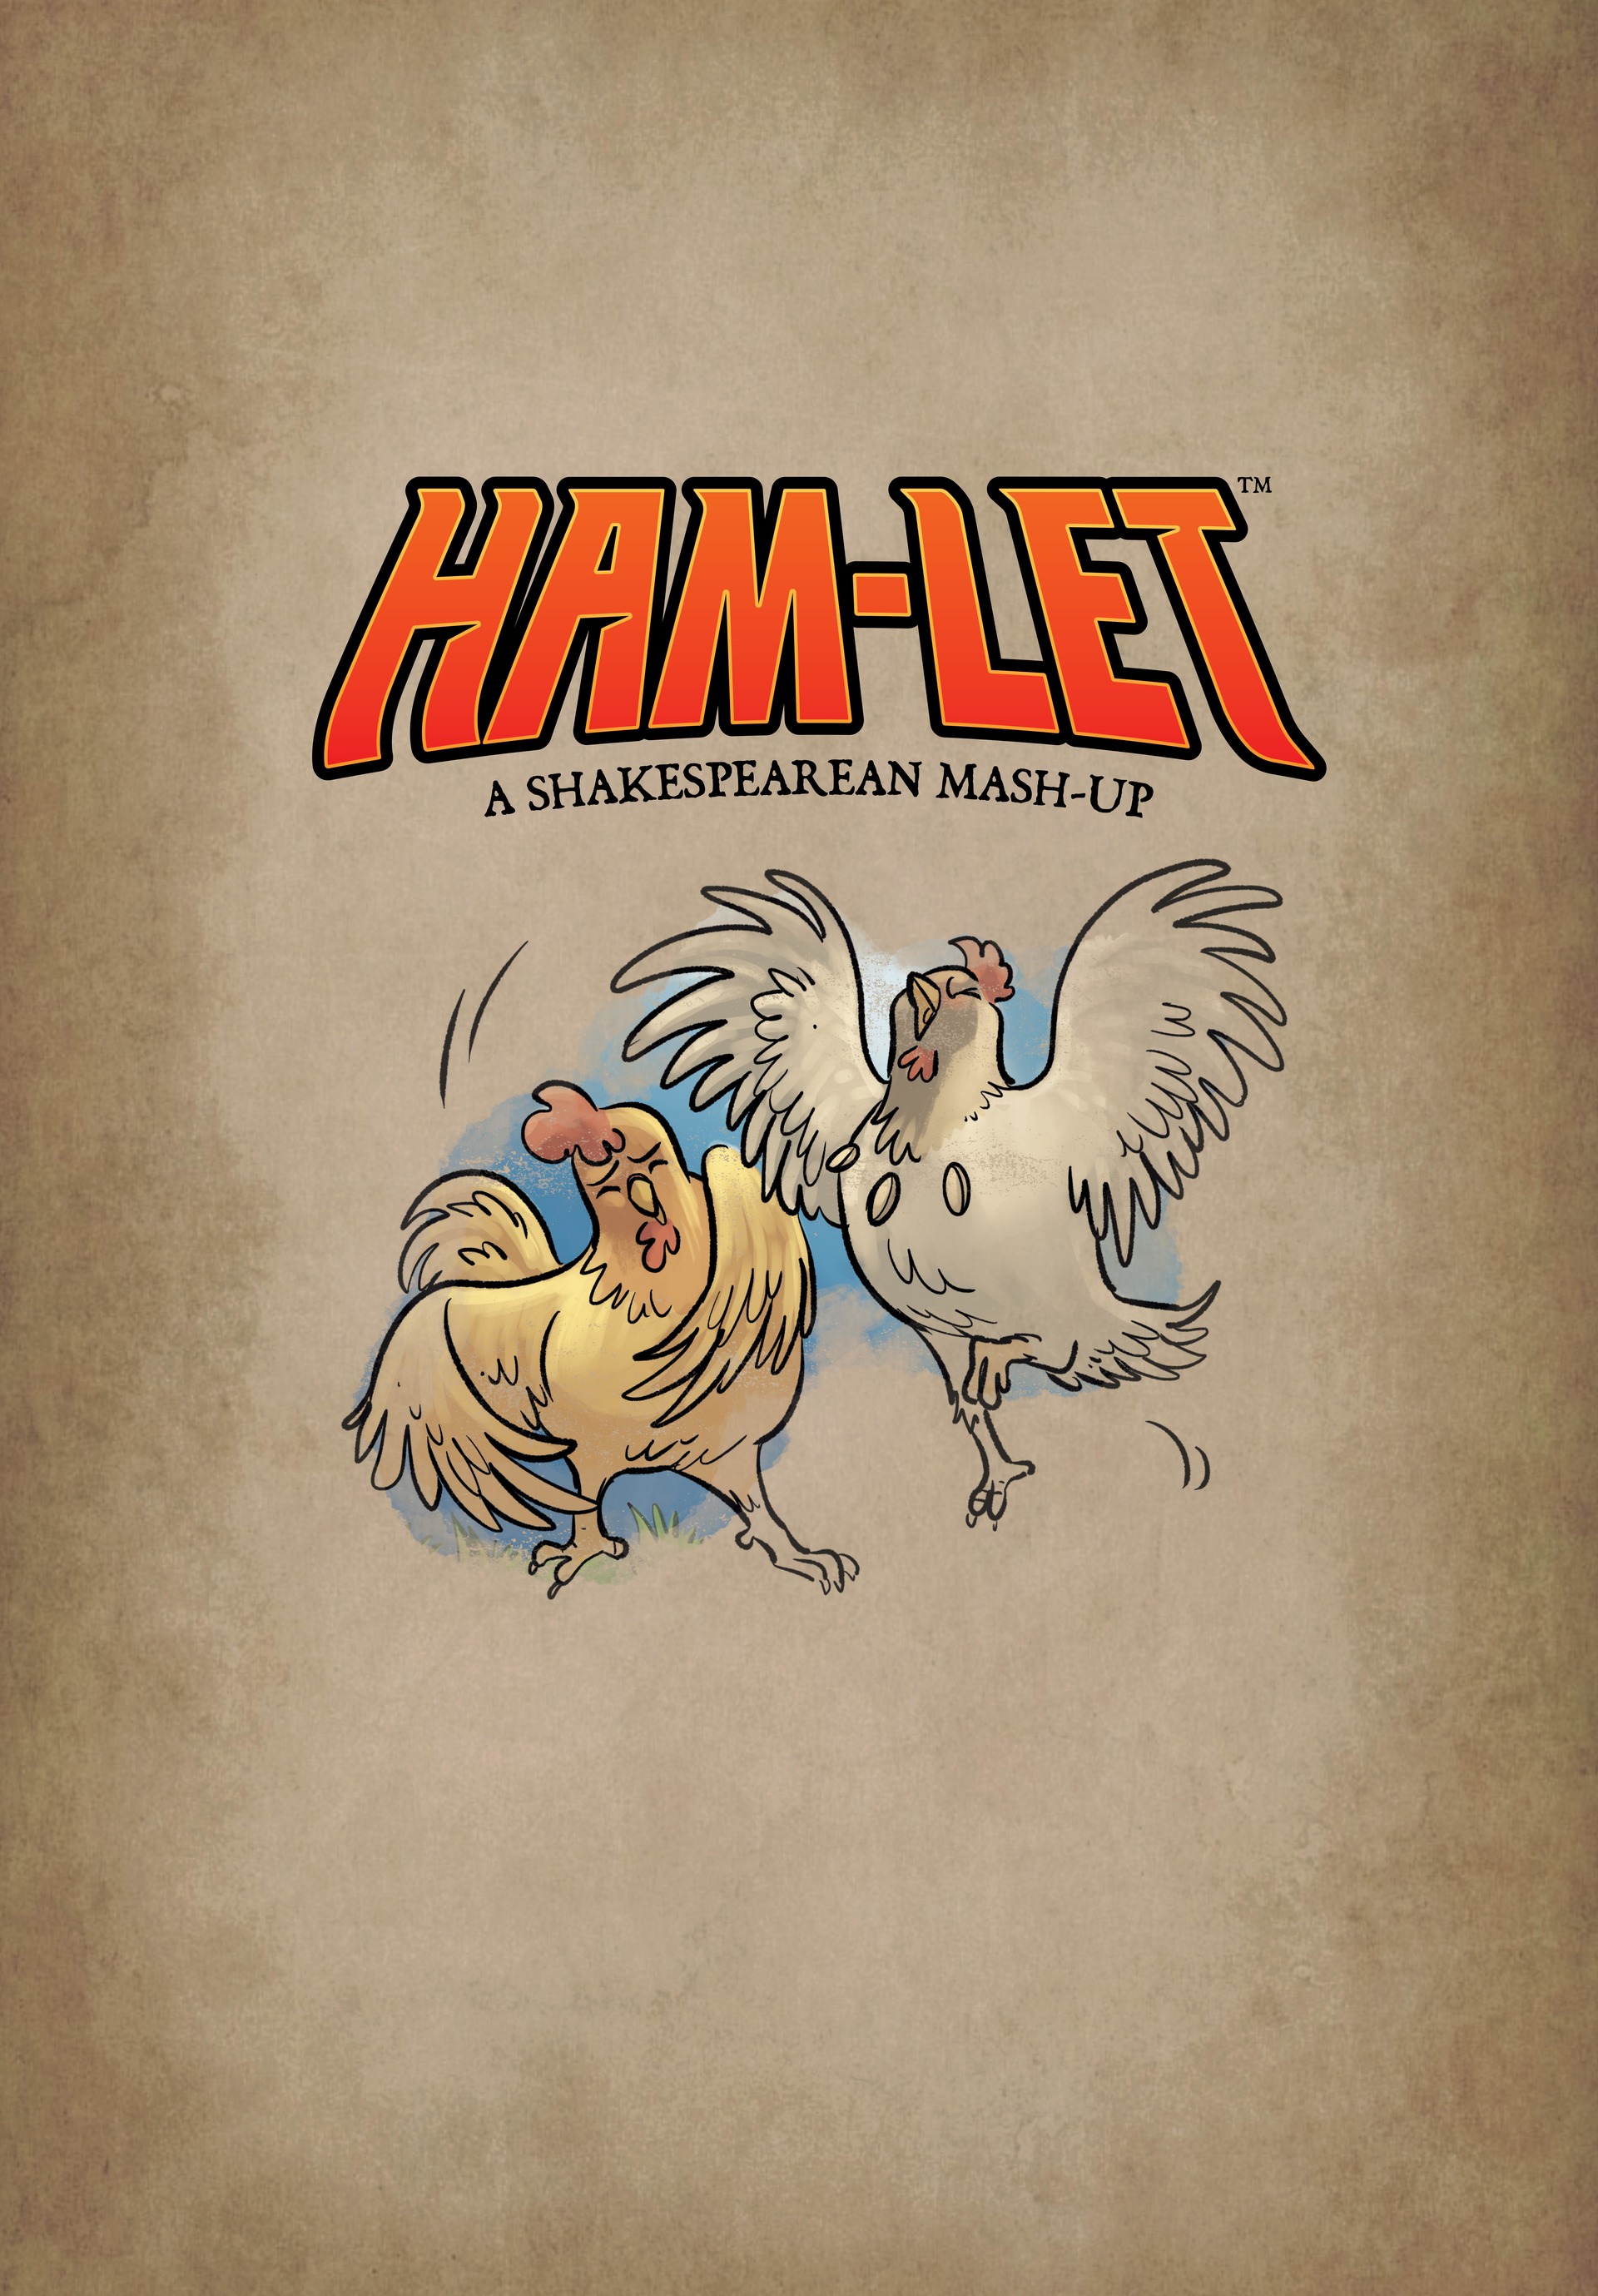 Read online Ham-let: A Shakespearean Mash-up comic -  Issue # Full - 3